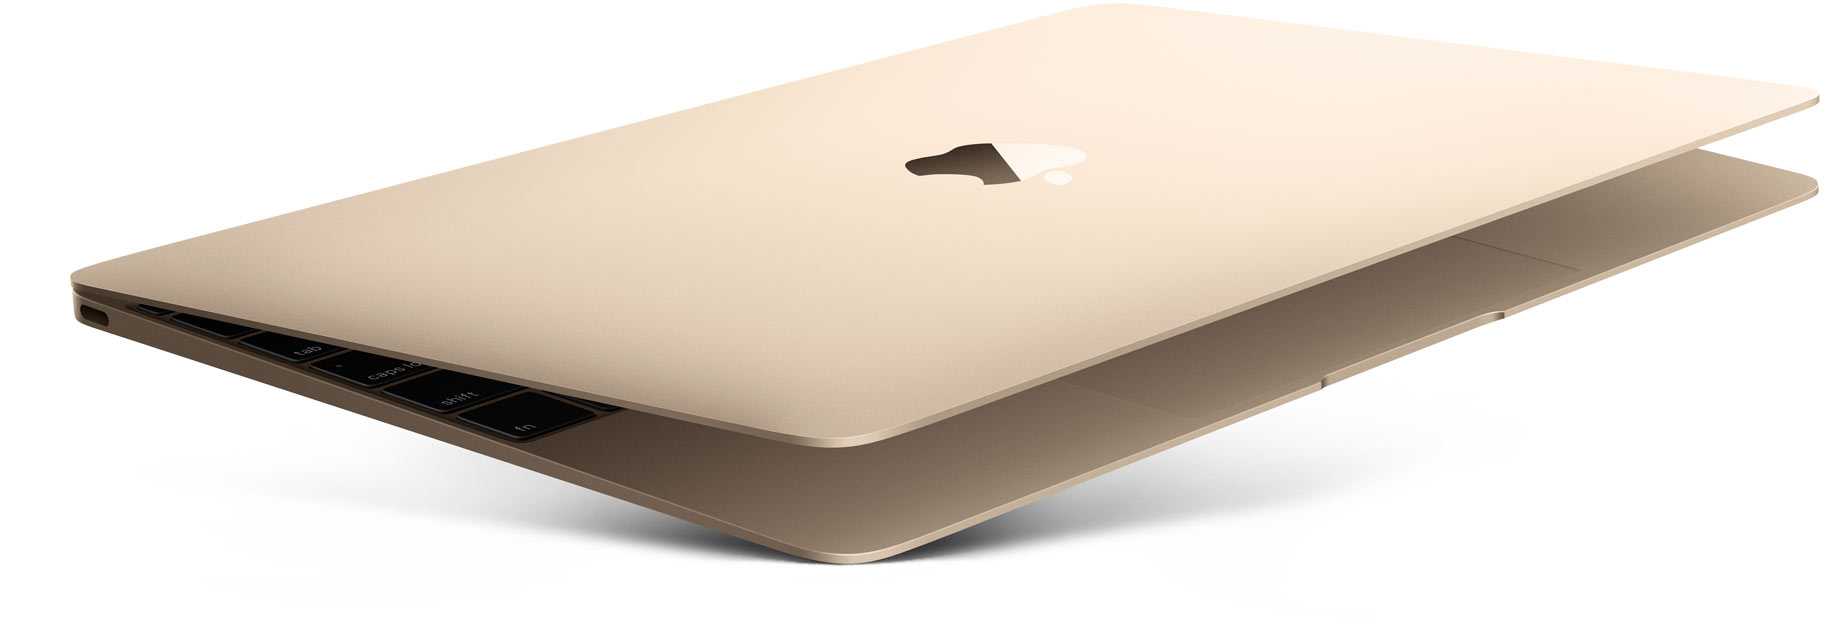 Buy the new MacBook up to 10 times and get $ 1,000 off!